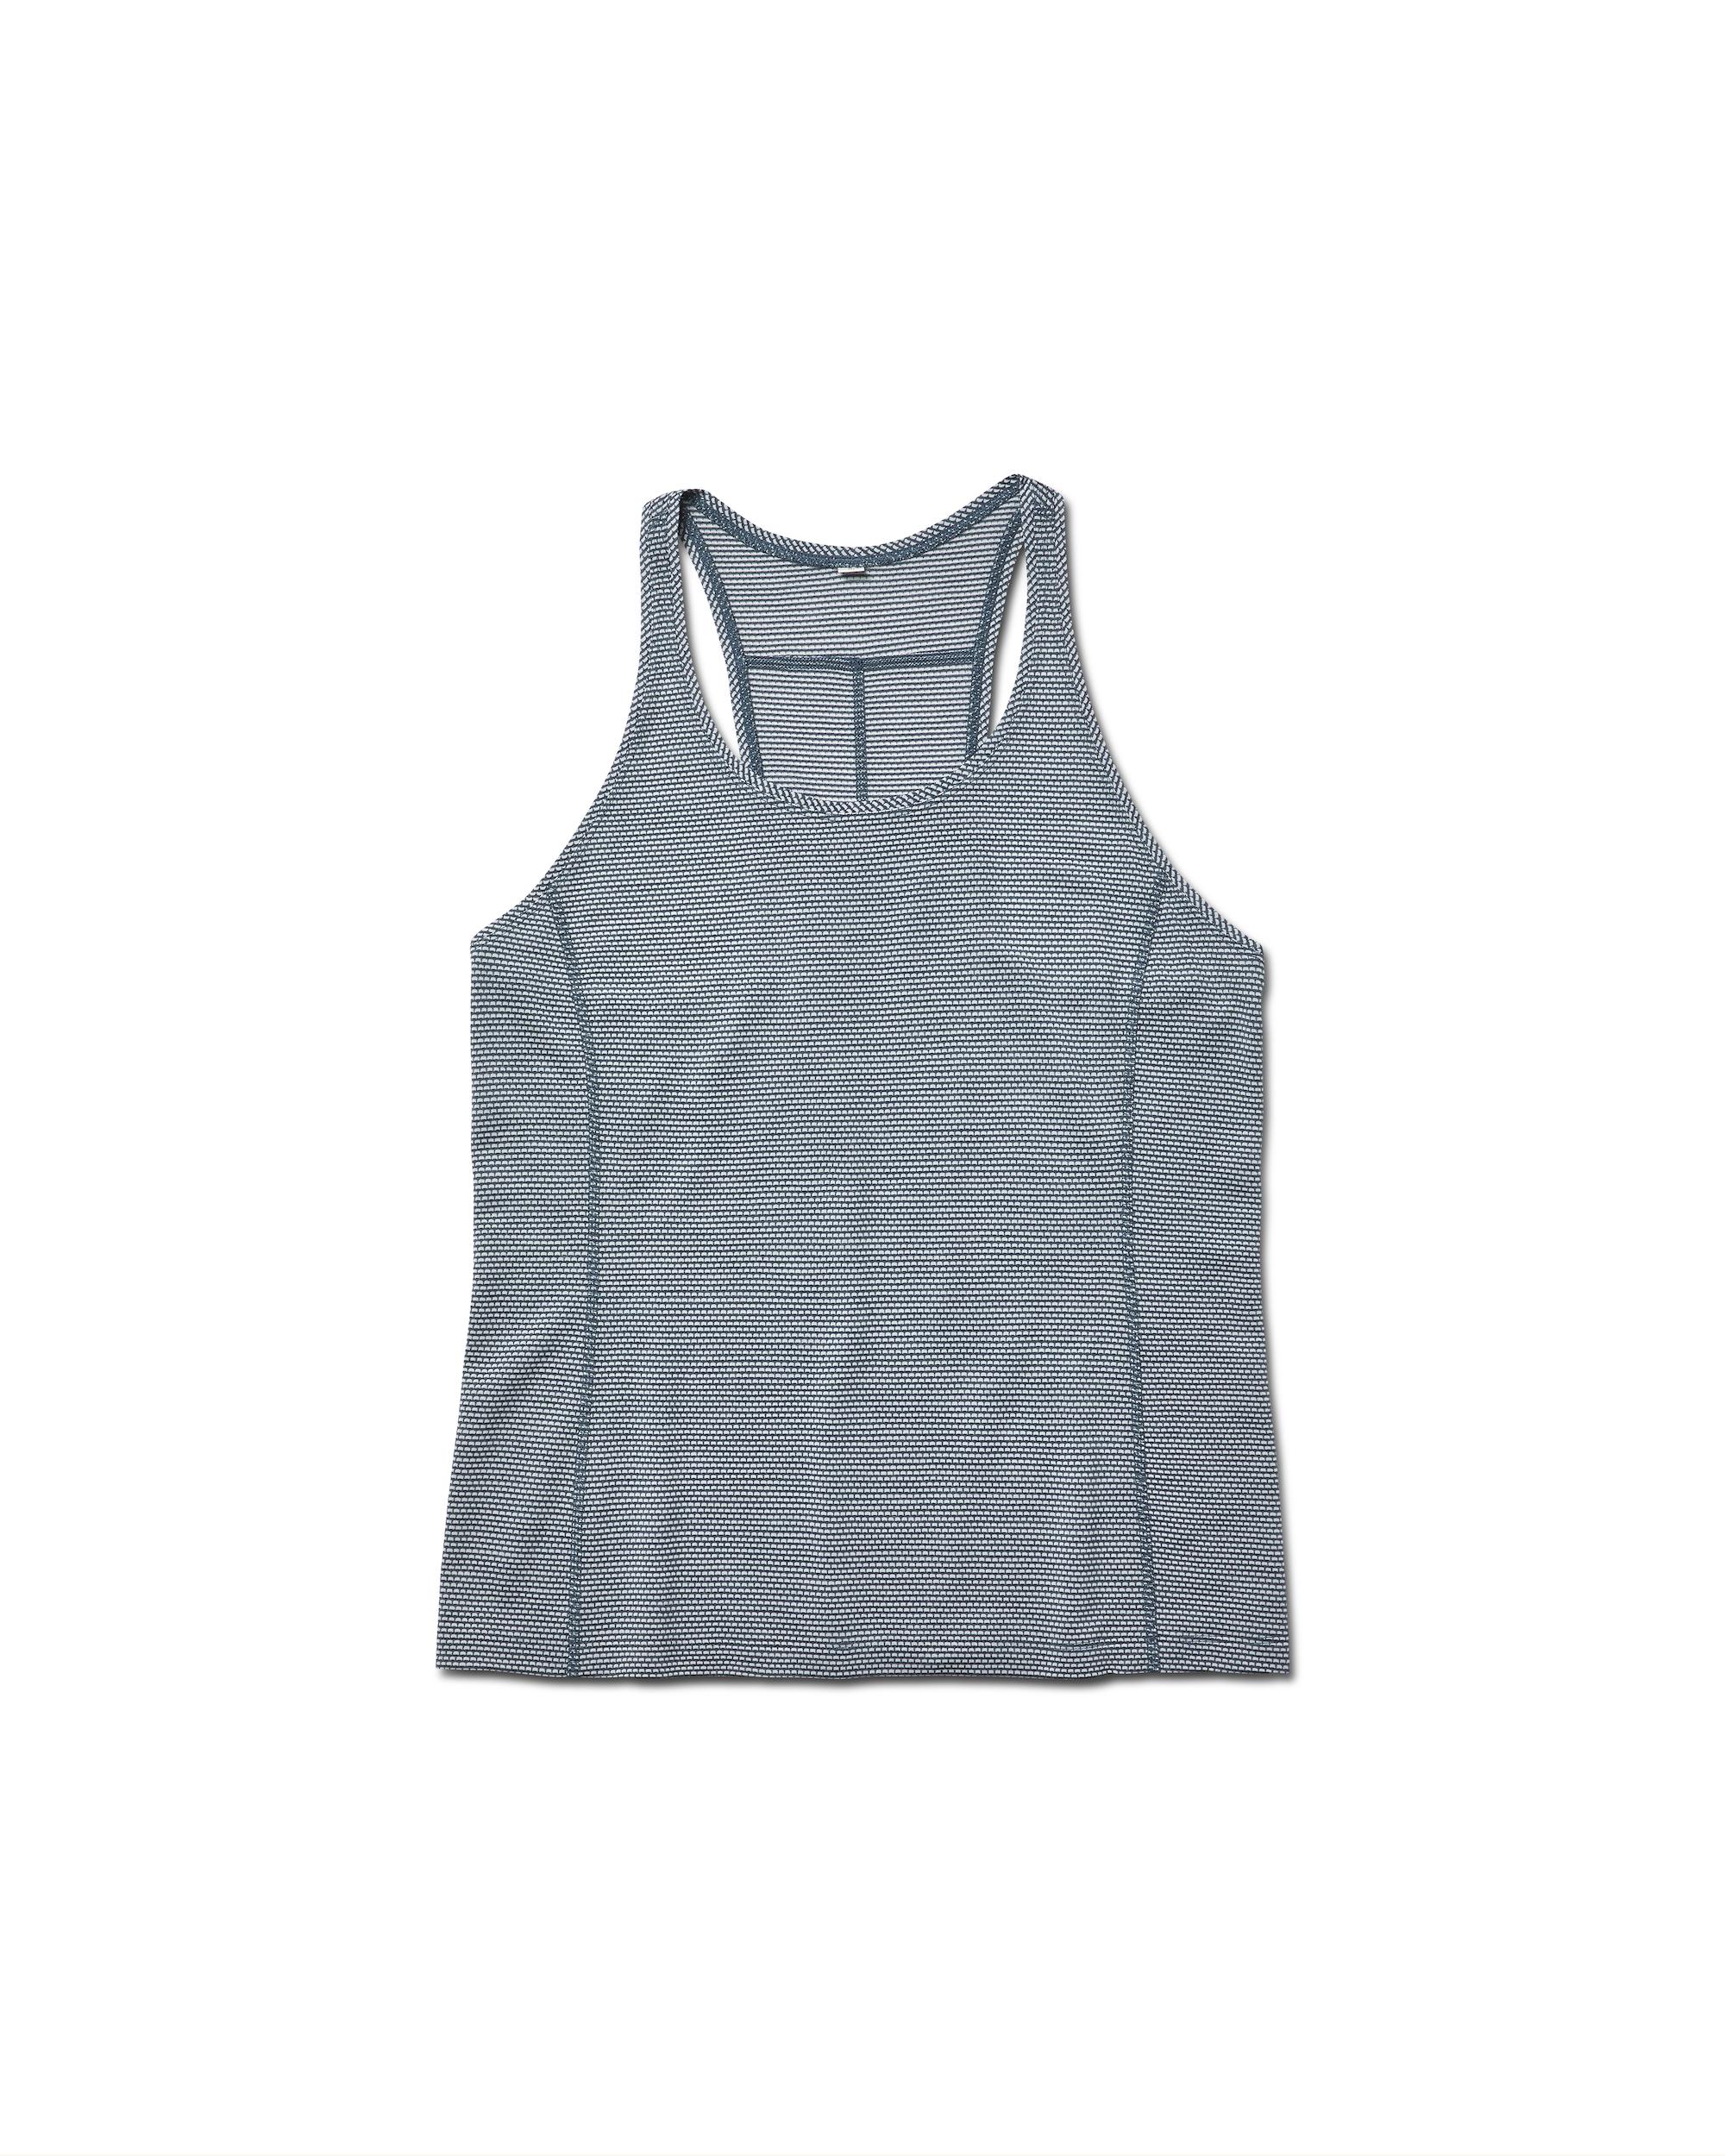 Stylish New Workout Gear to Add to Your Rotation Now - FASHION Magazine